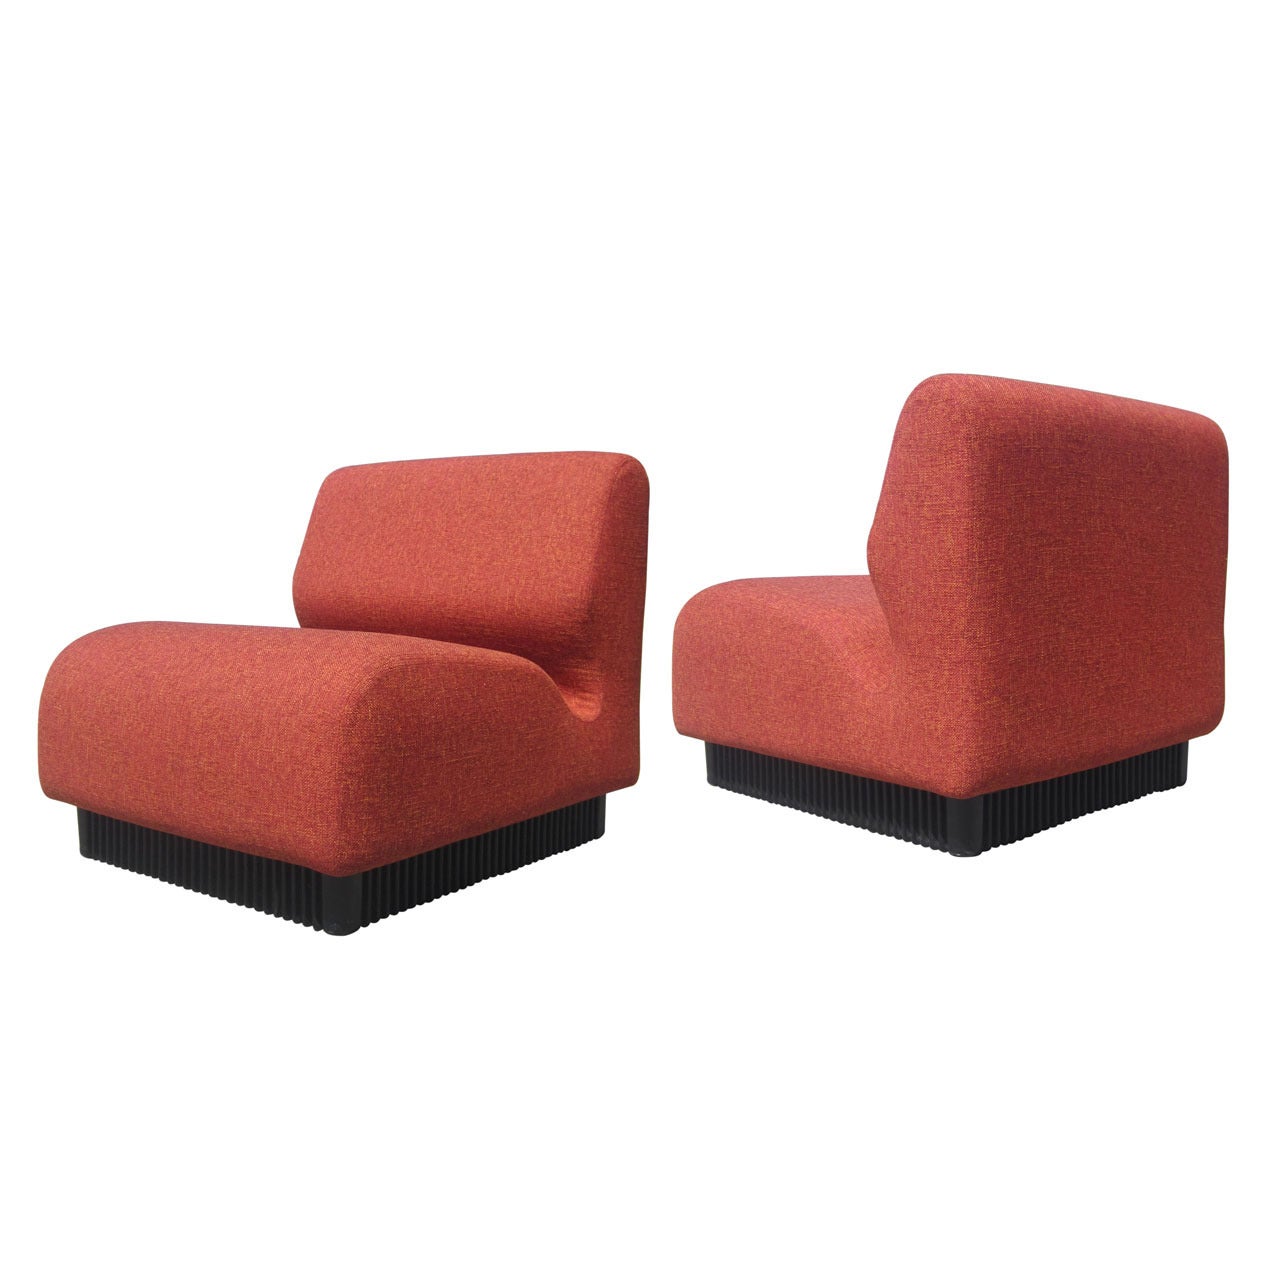 Slipper Chairs by Don Chadwick for Herman Miller, Pair